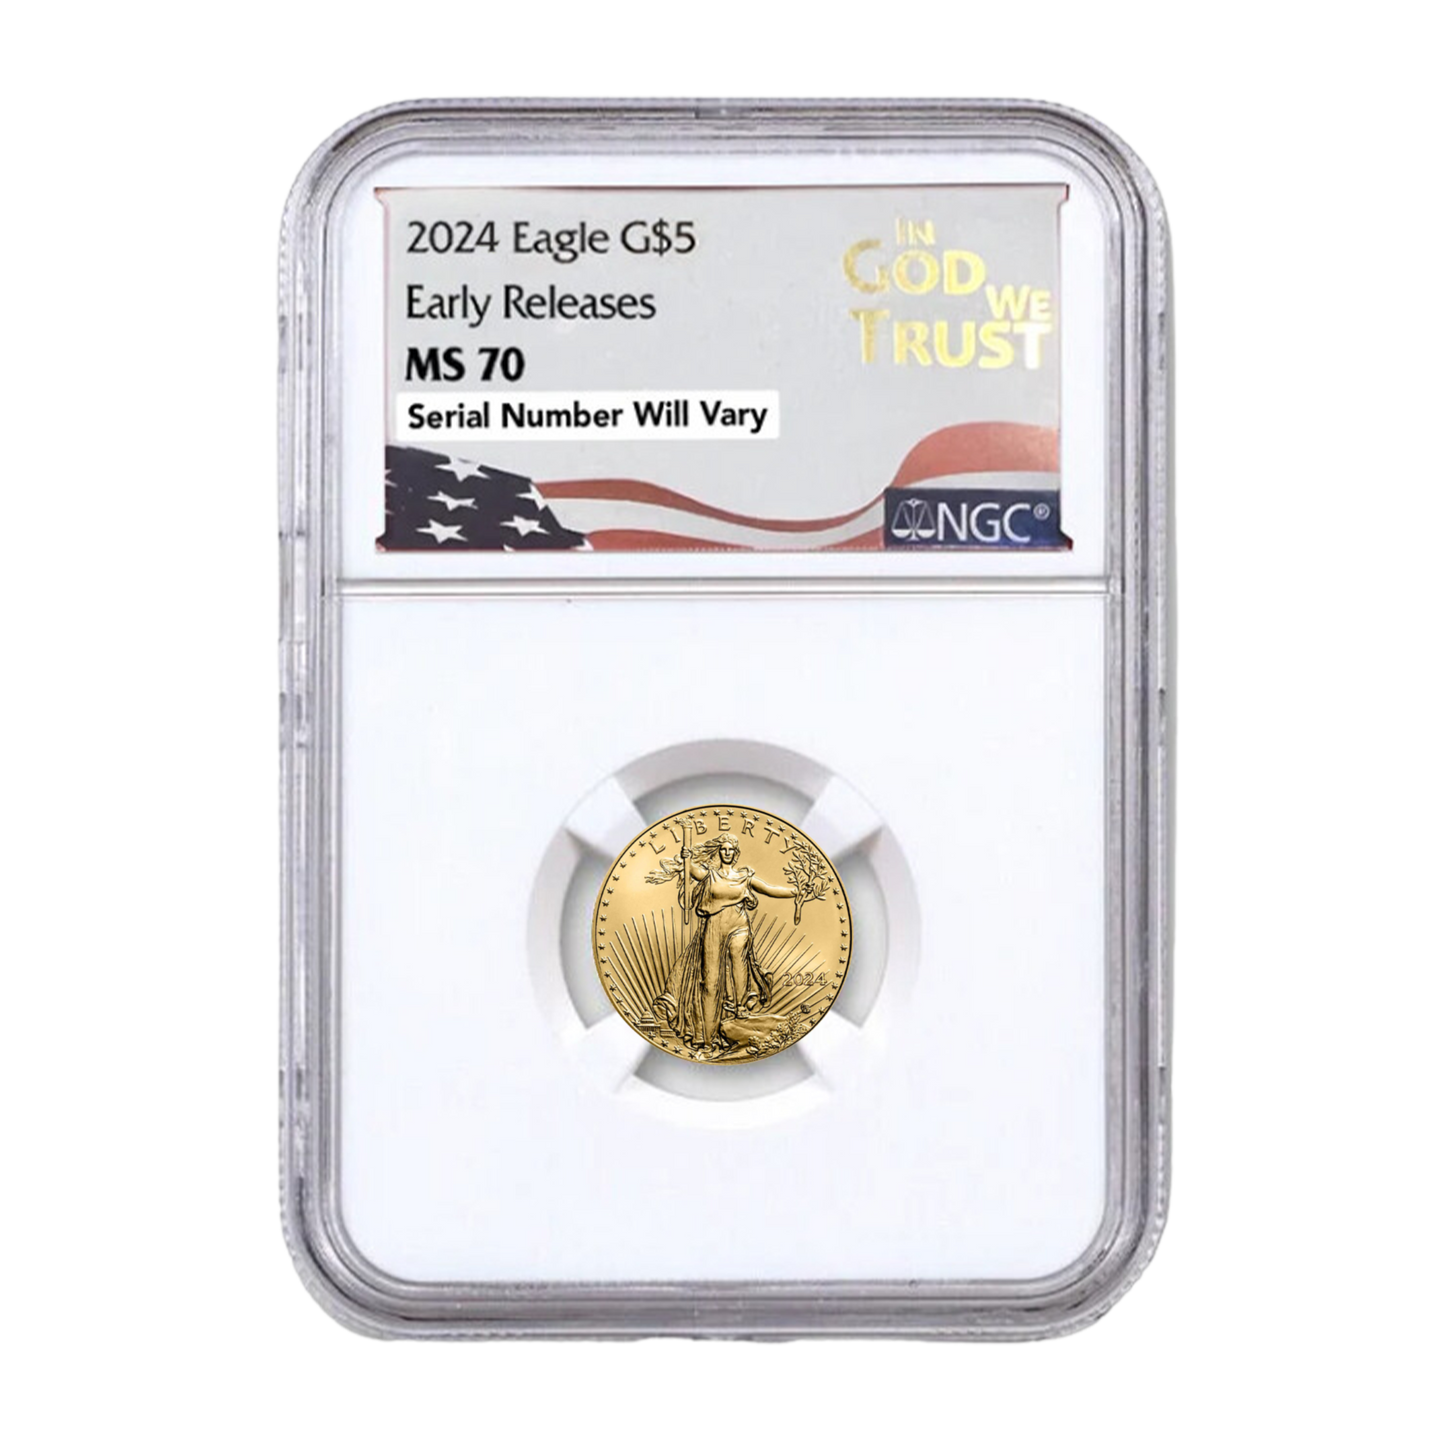 2024 $5 Gold Eagle in God We Trust Label - NGC MS70 Early Releases